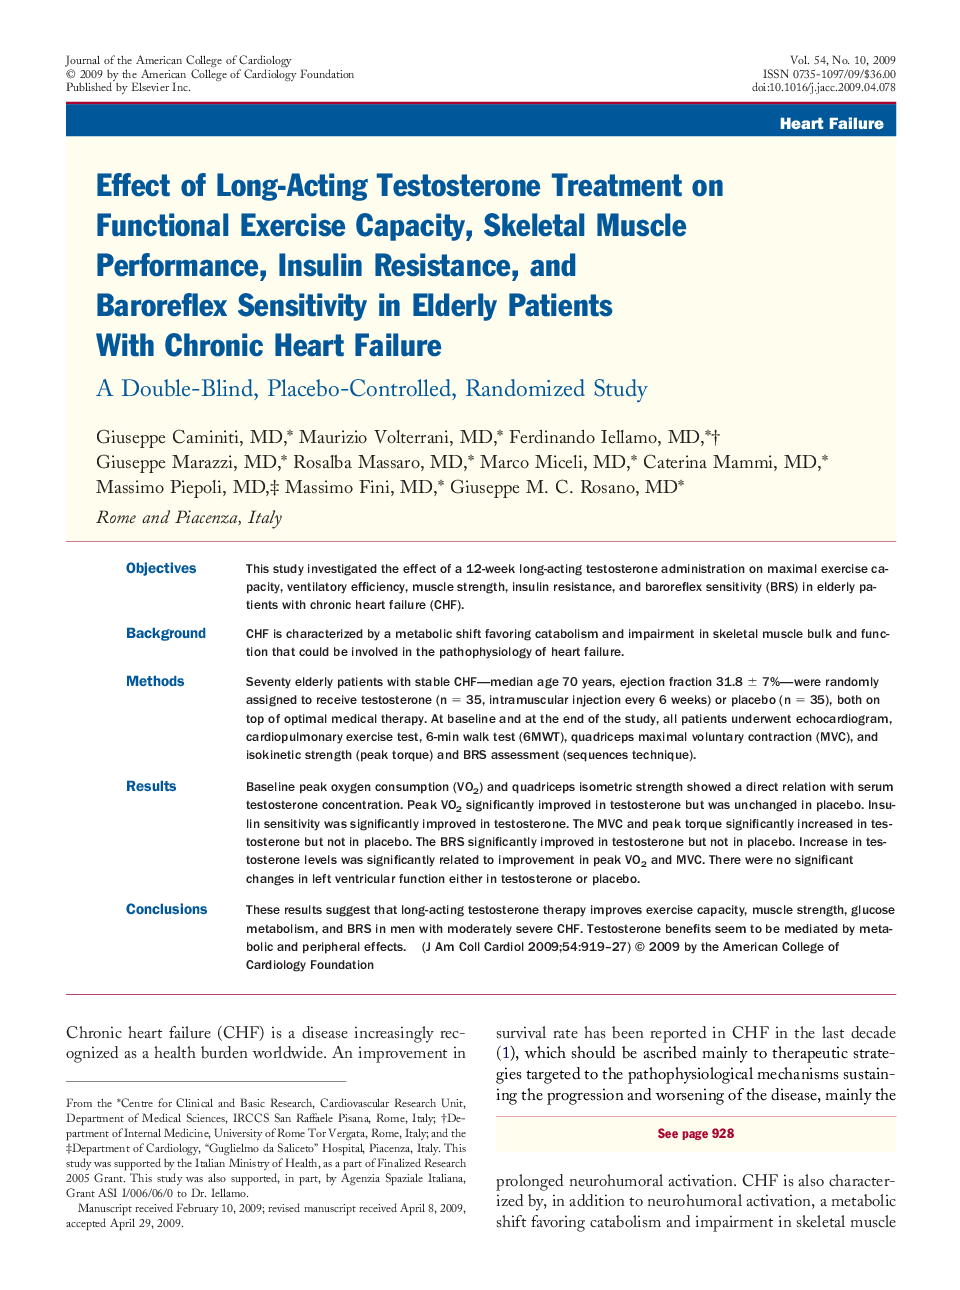 Effect of Long-Acting Testosterone Treatment on Functional Exercise Capacity, Skeletal Muscle Performance, Insulin Resistance, and Baroreflex Sensitivity in Elderly Patients With Chronic Heart Failure : A Double-Blind, Placebo-Controlled, Randomized Study